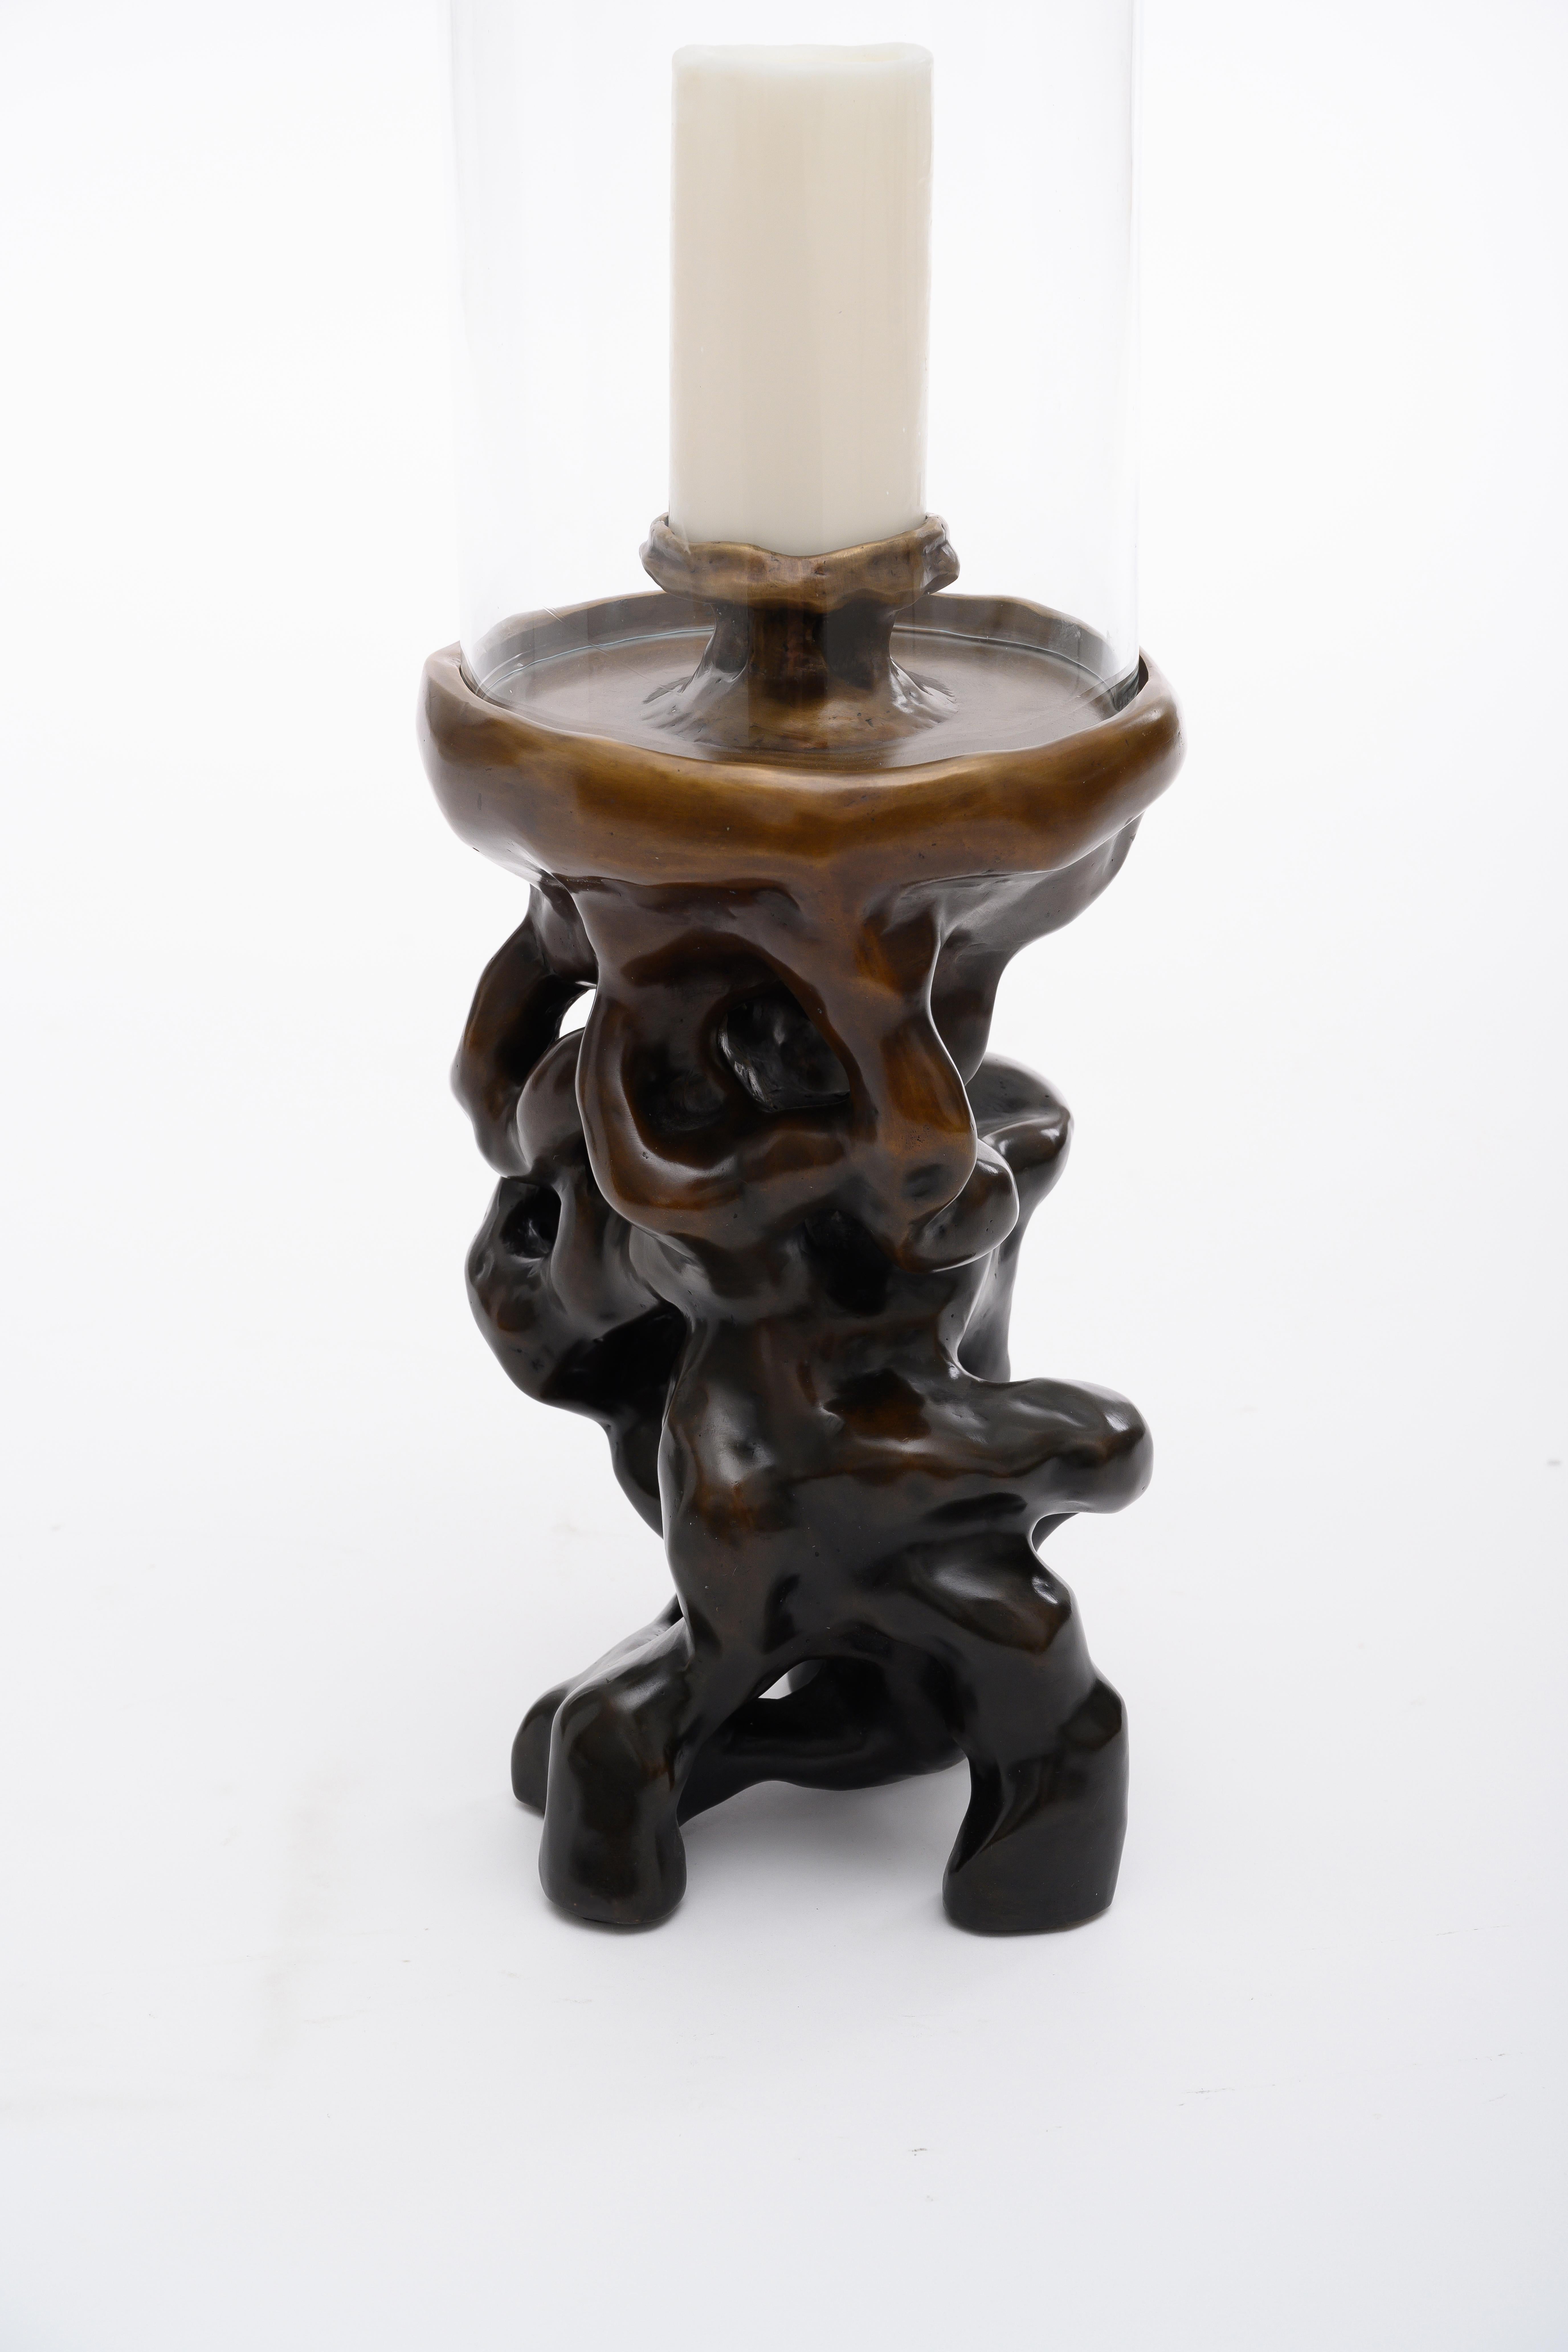 Cavee Hurricane in Antique Bronze with Glass Shade from Elan Atelier

Inspired by the Chinese Scholars' stones, the cave hurricane candle stand is a sculptural beauty in cast bronze with glass shade. Comes standard in our gradually darkening flaxen